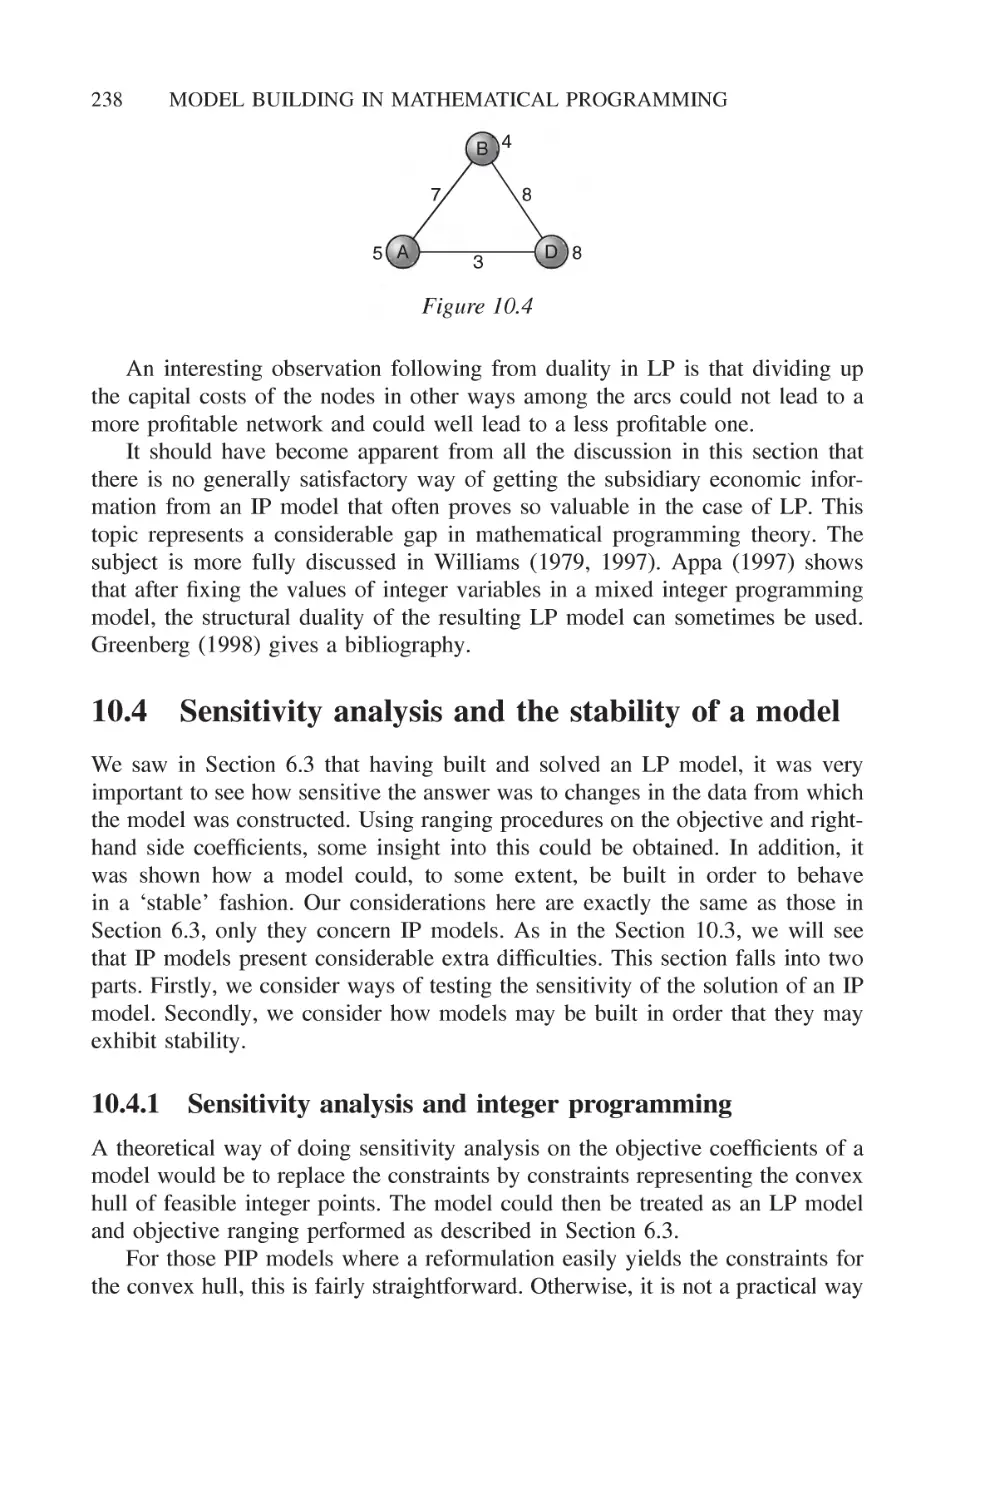 10.4 Sensitivity analysis and the stability of a model